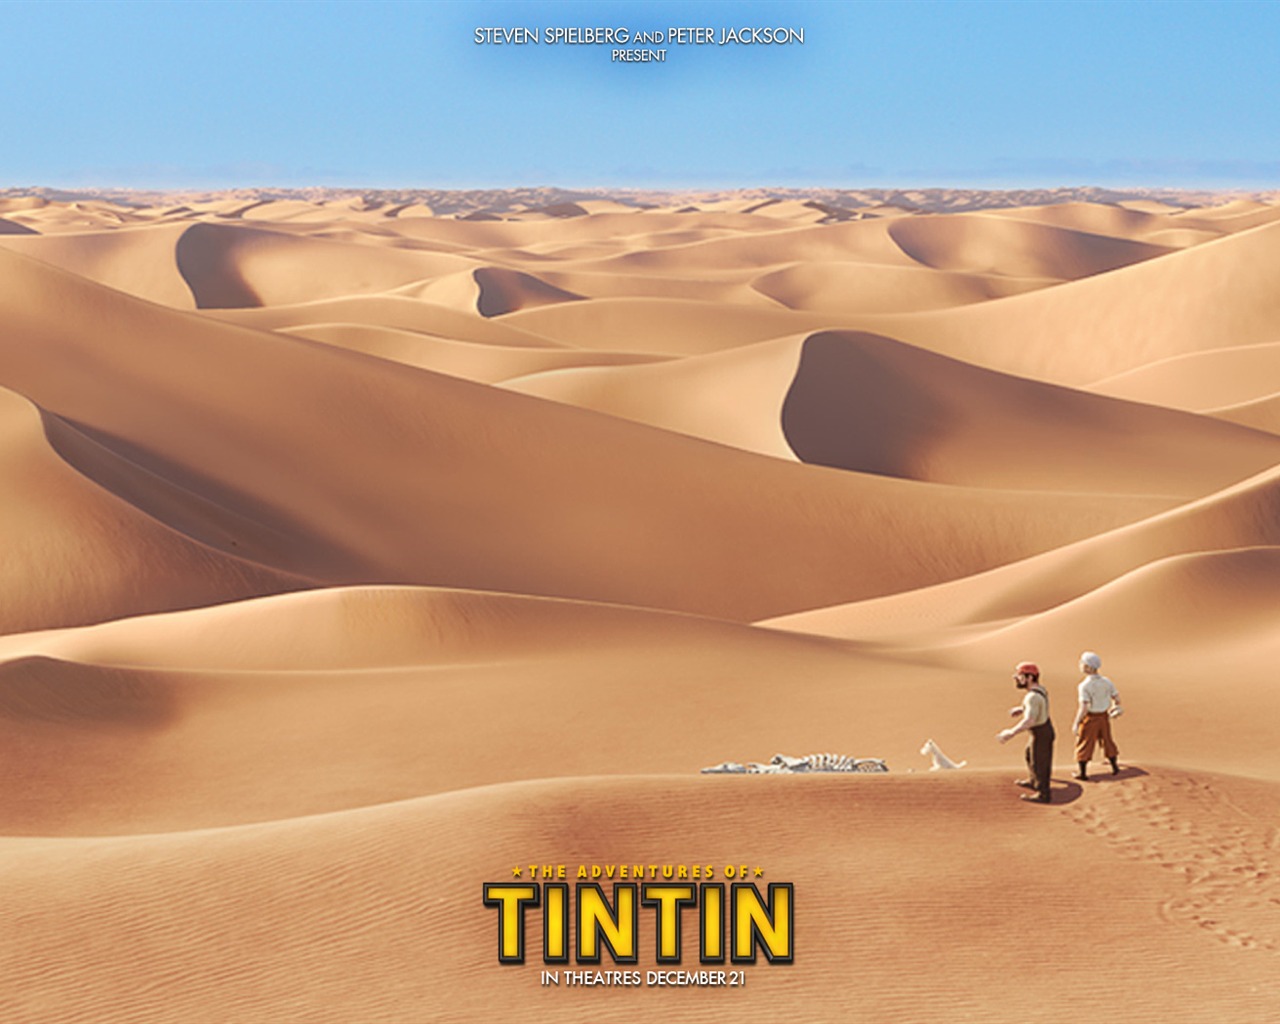 The Adventures of Tintin HD wallpapers #5 - 1280x1024